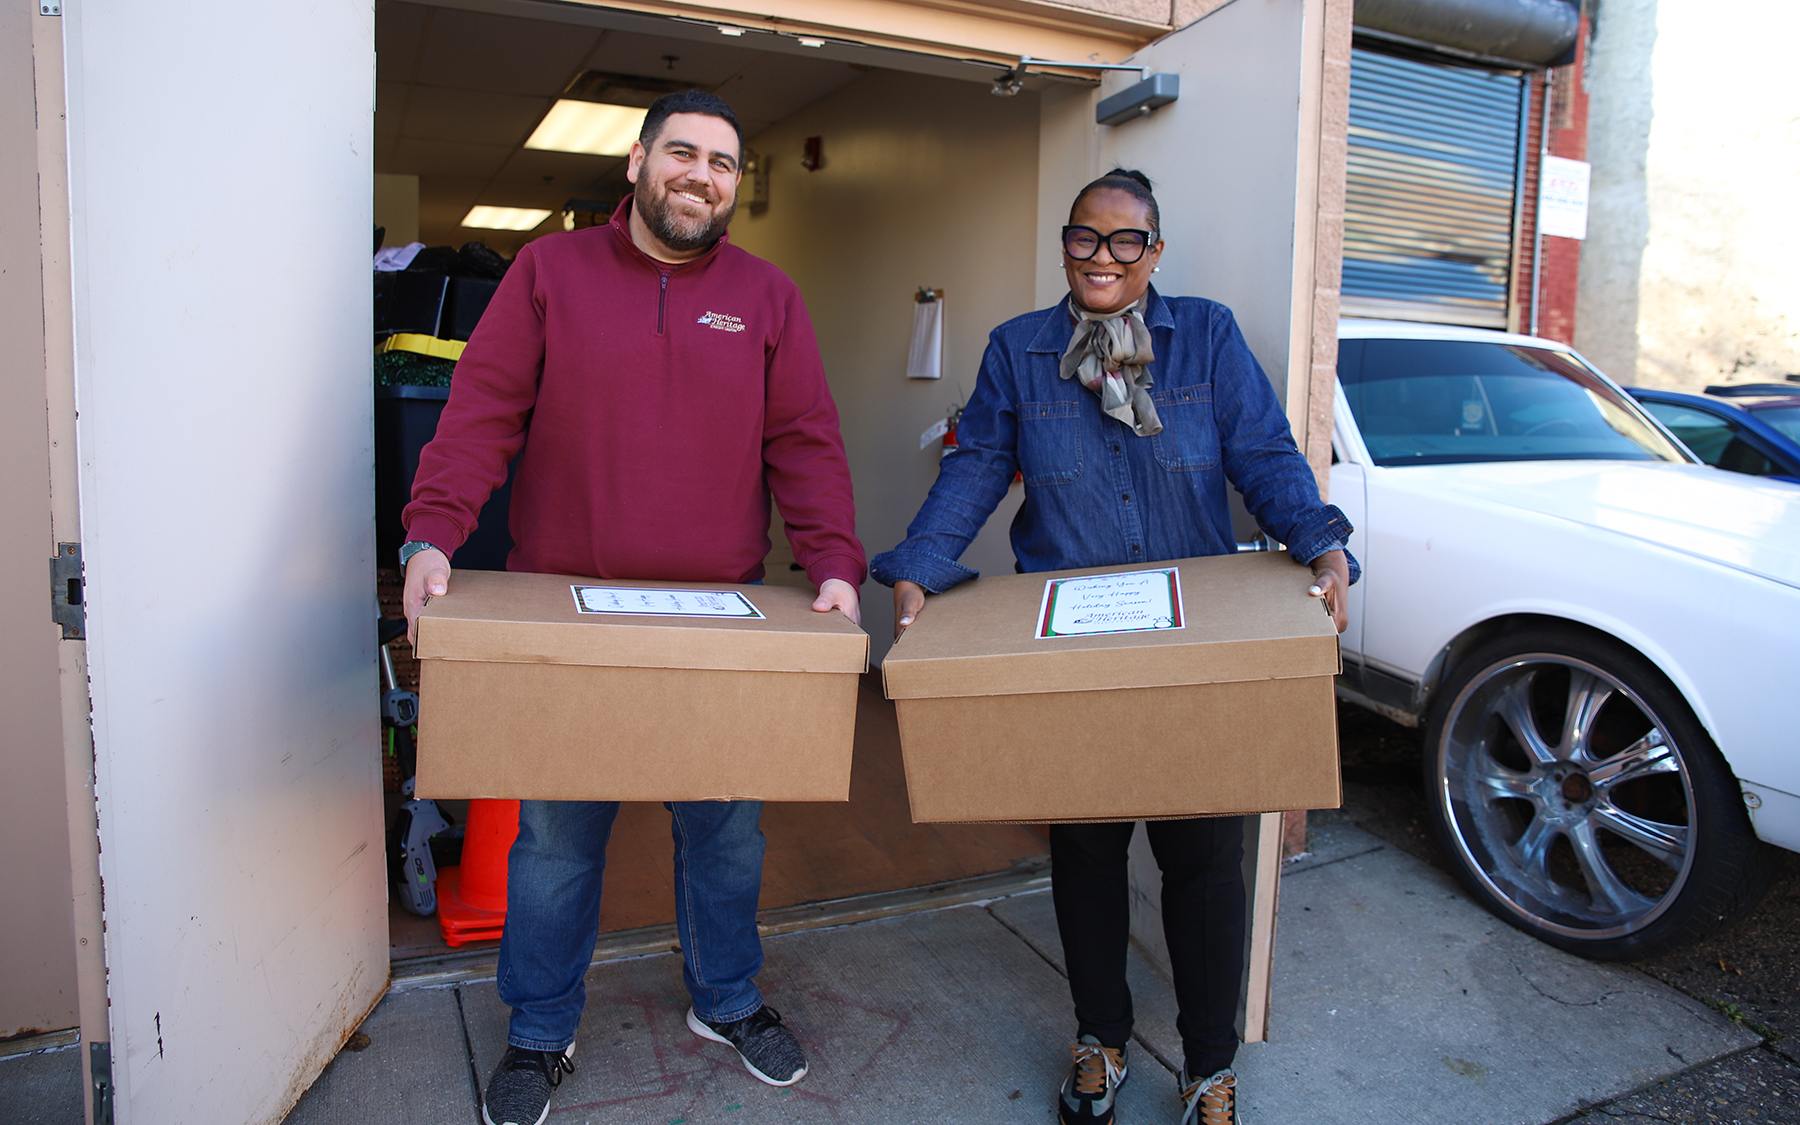 To individuals hold meal boxes which were donated by American Heritage Credit Union.